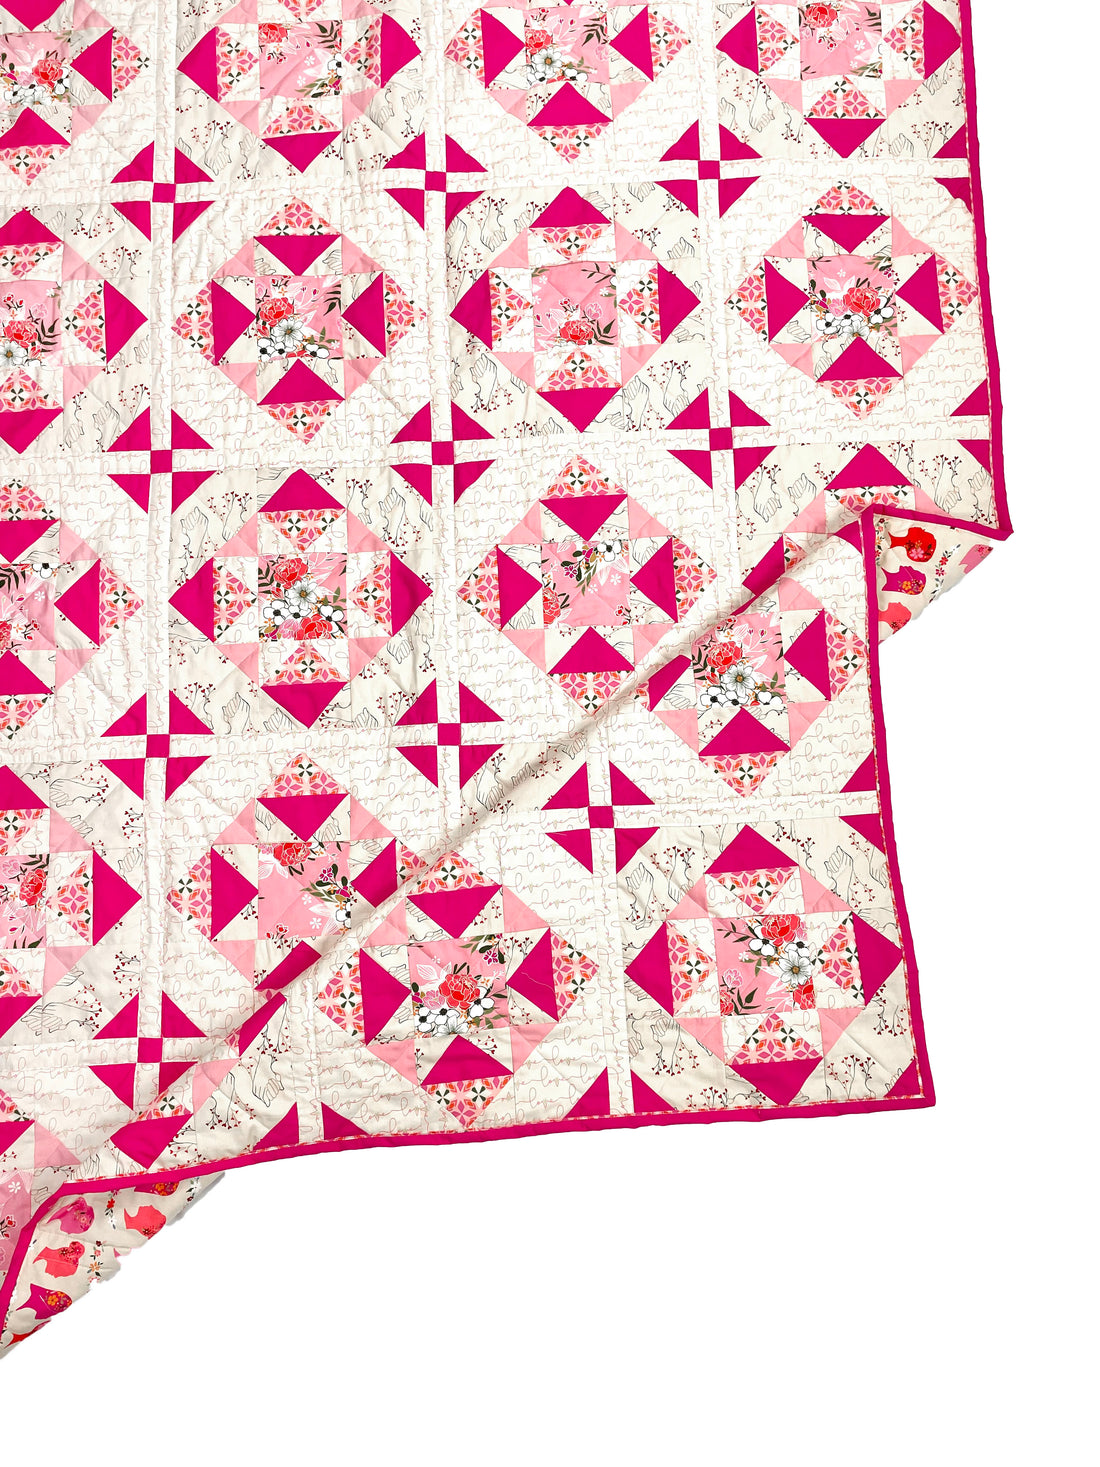 Alta Blooms Quilt is Here!